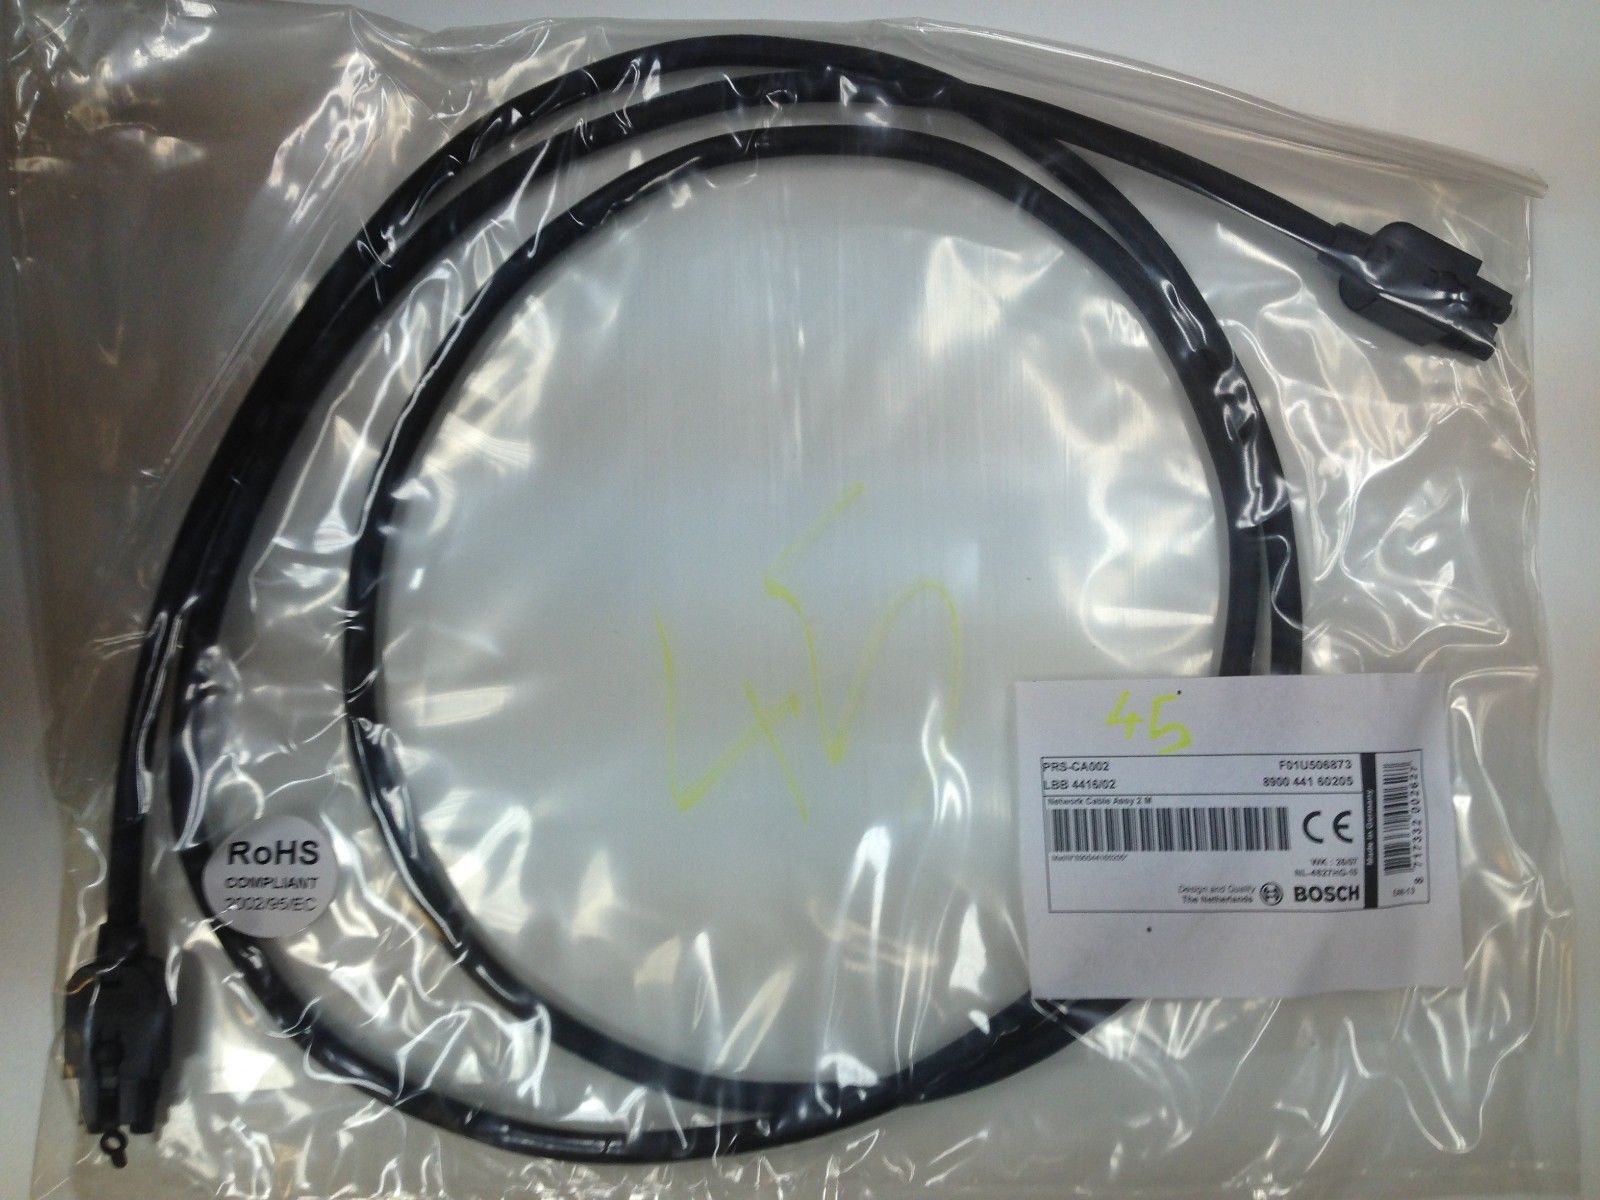 Lot-of-3-cable-bosch-lbb4416-02-network-cable-assy-f01u506873